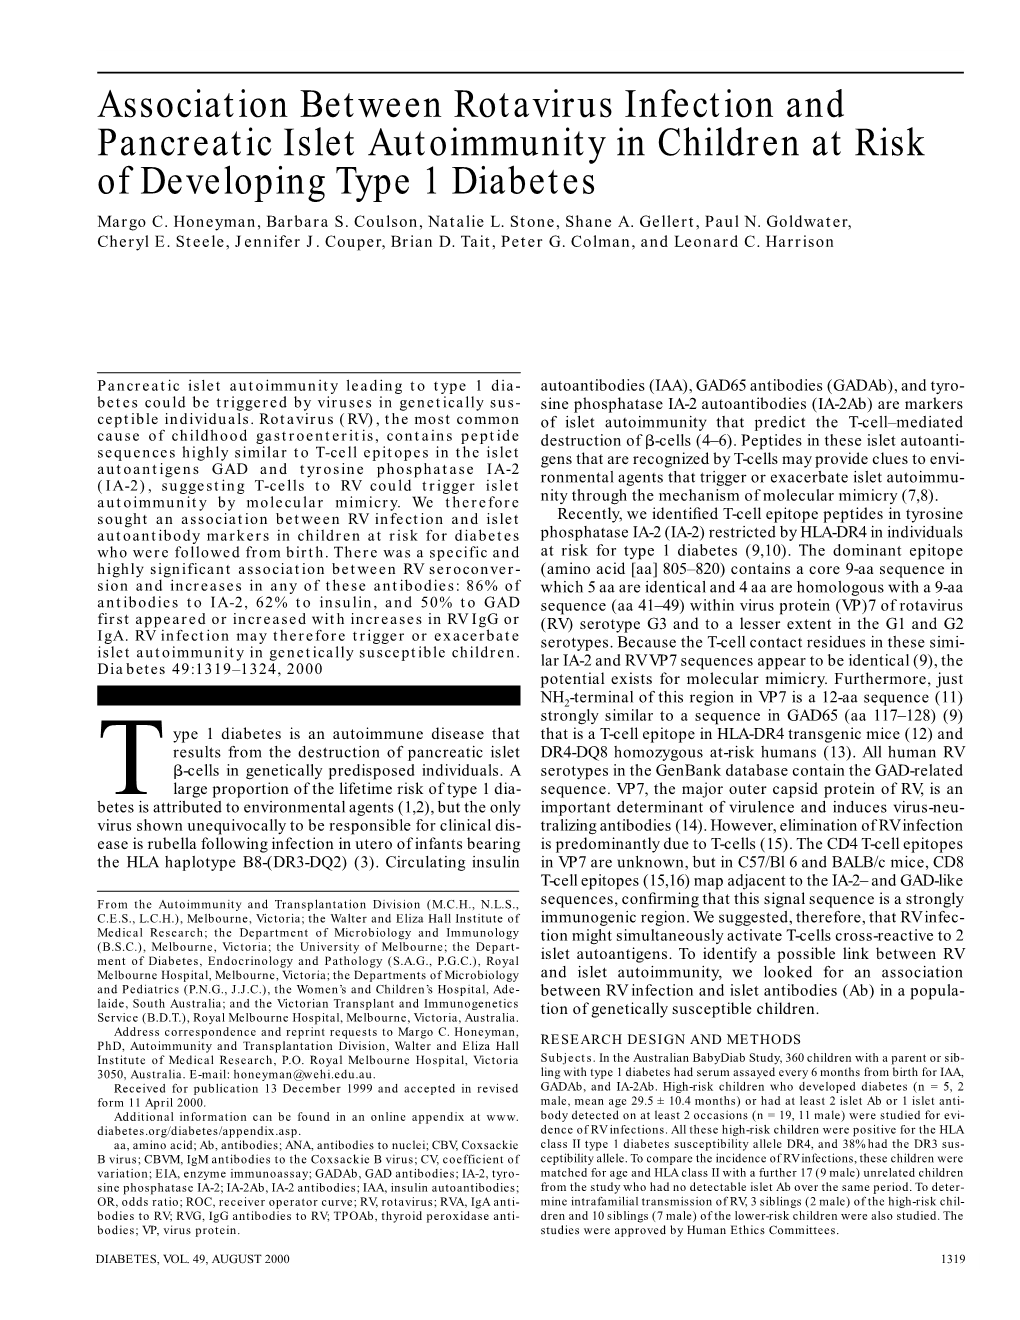 Association Between Rotavirus Infection and Pancreatic Islet Autoimmunity in Children at Risk of Developing Type 1 Diabetes Margo C